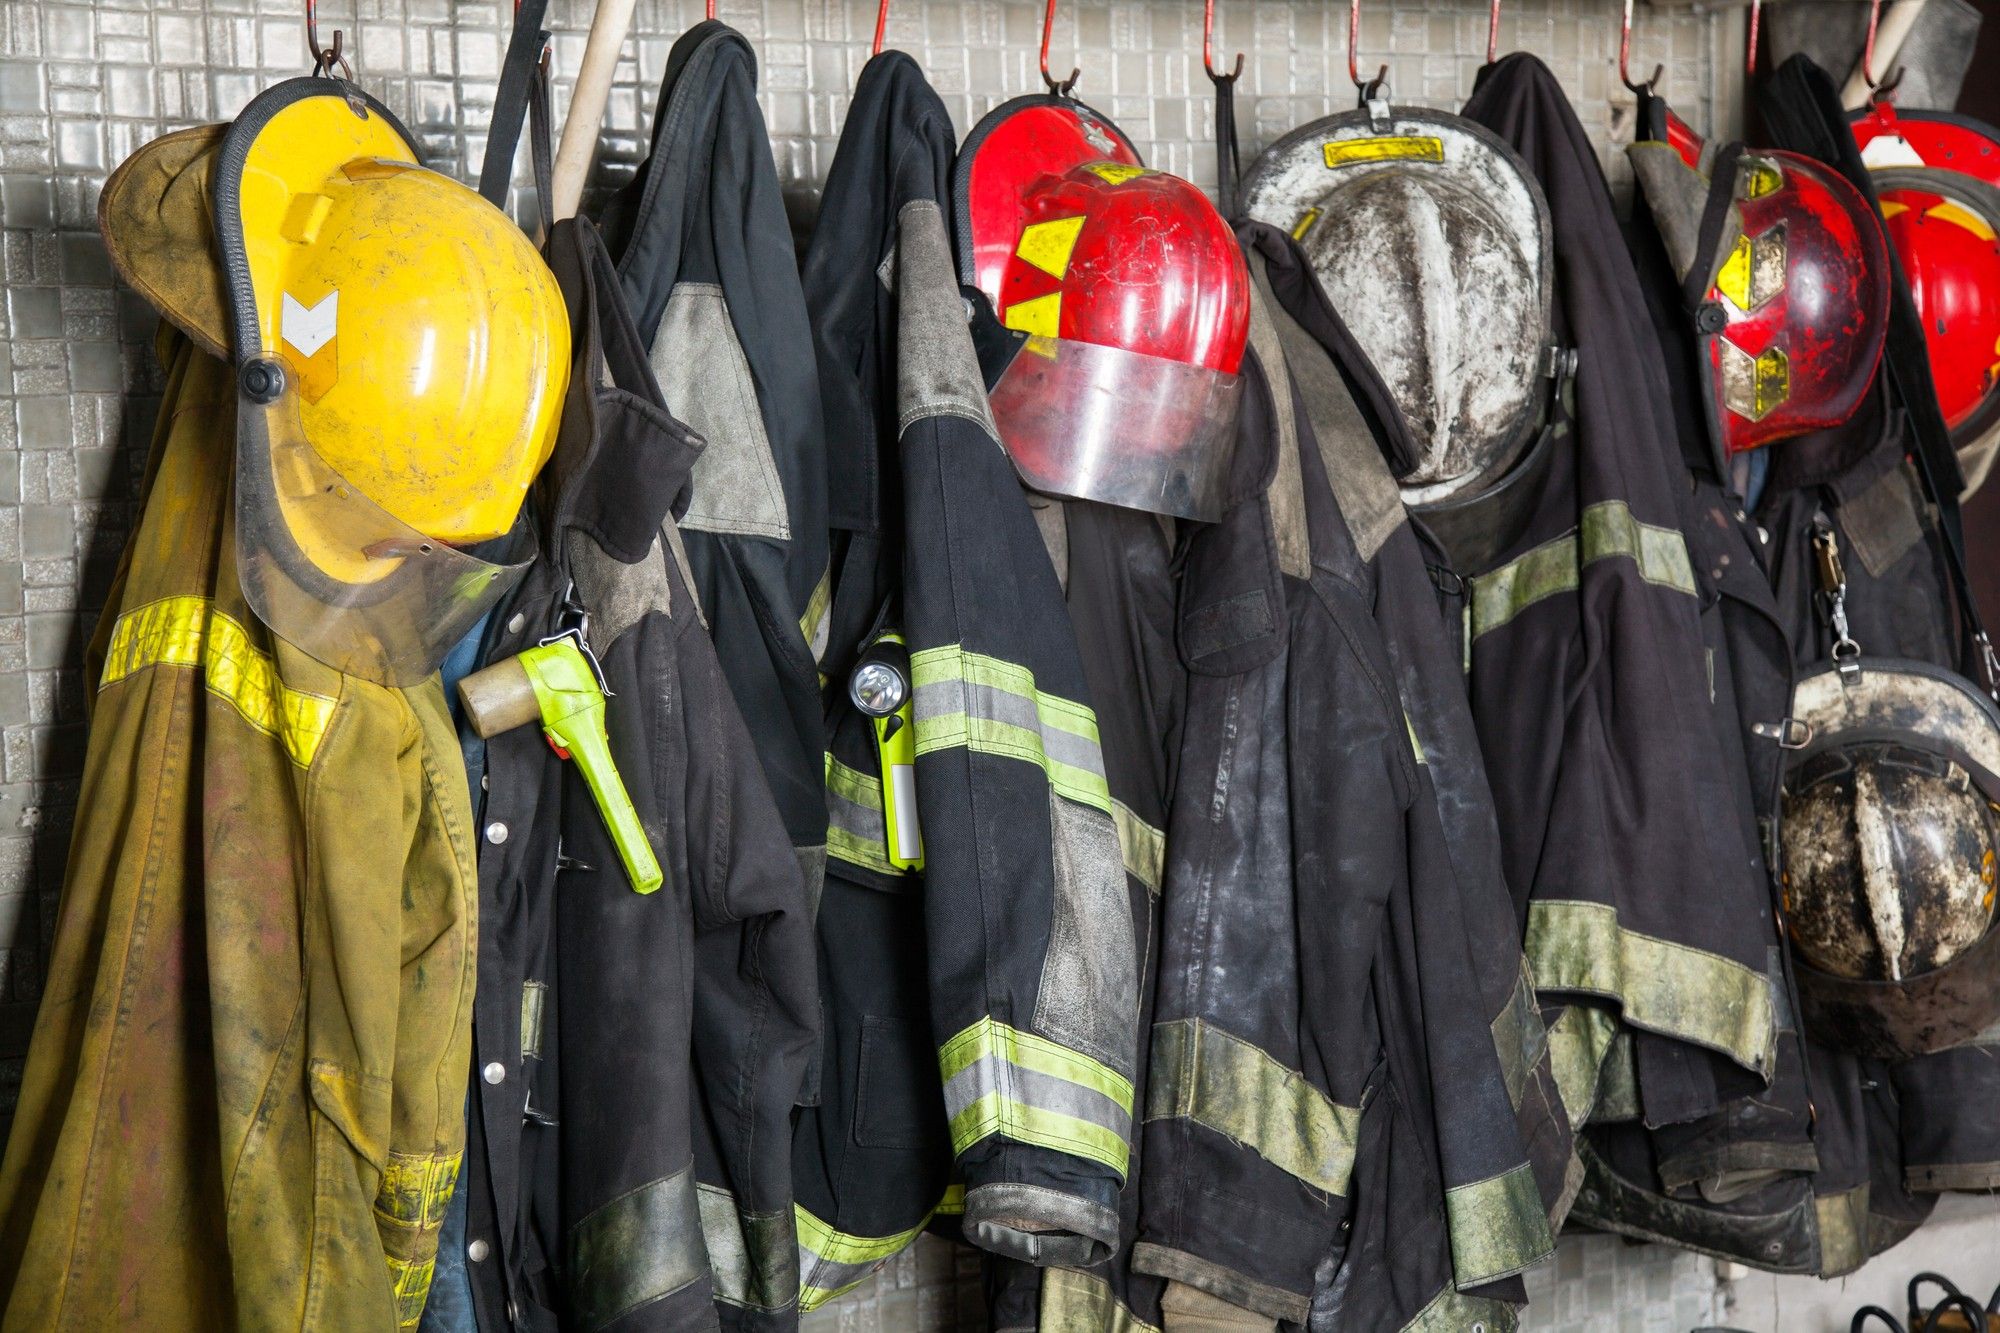 Firefighters' gear hangs on hooks - 9/11 Victims Compensation Fund